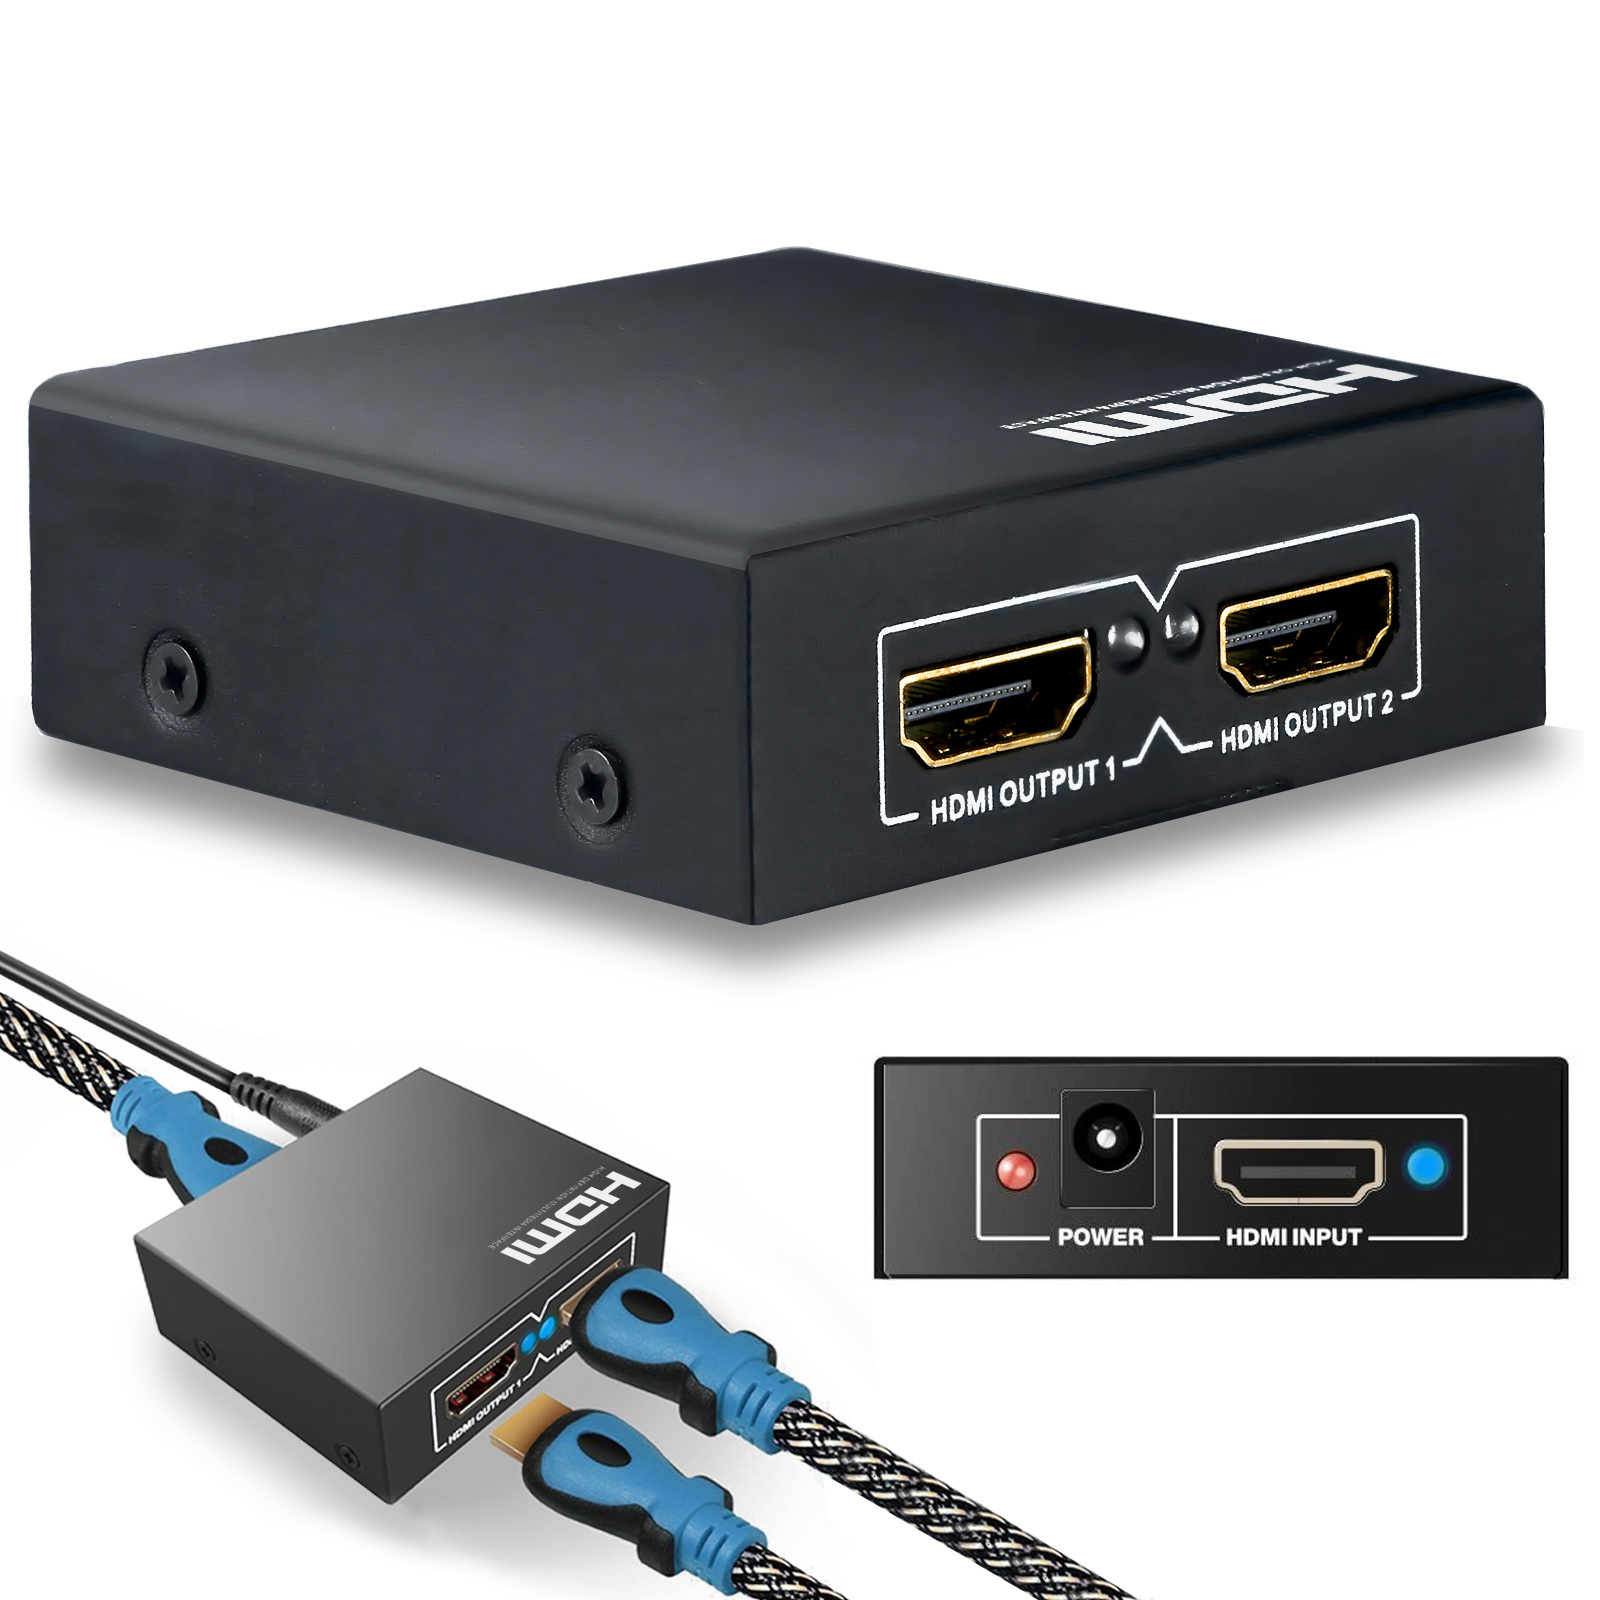 Måne sigte Tether HDMI Splitter 1x2 with 4K Support - Duplicate the Same Video on 2 Displays  - DynoTech (400036) - Best Deal in Town Las Vegas